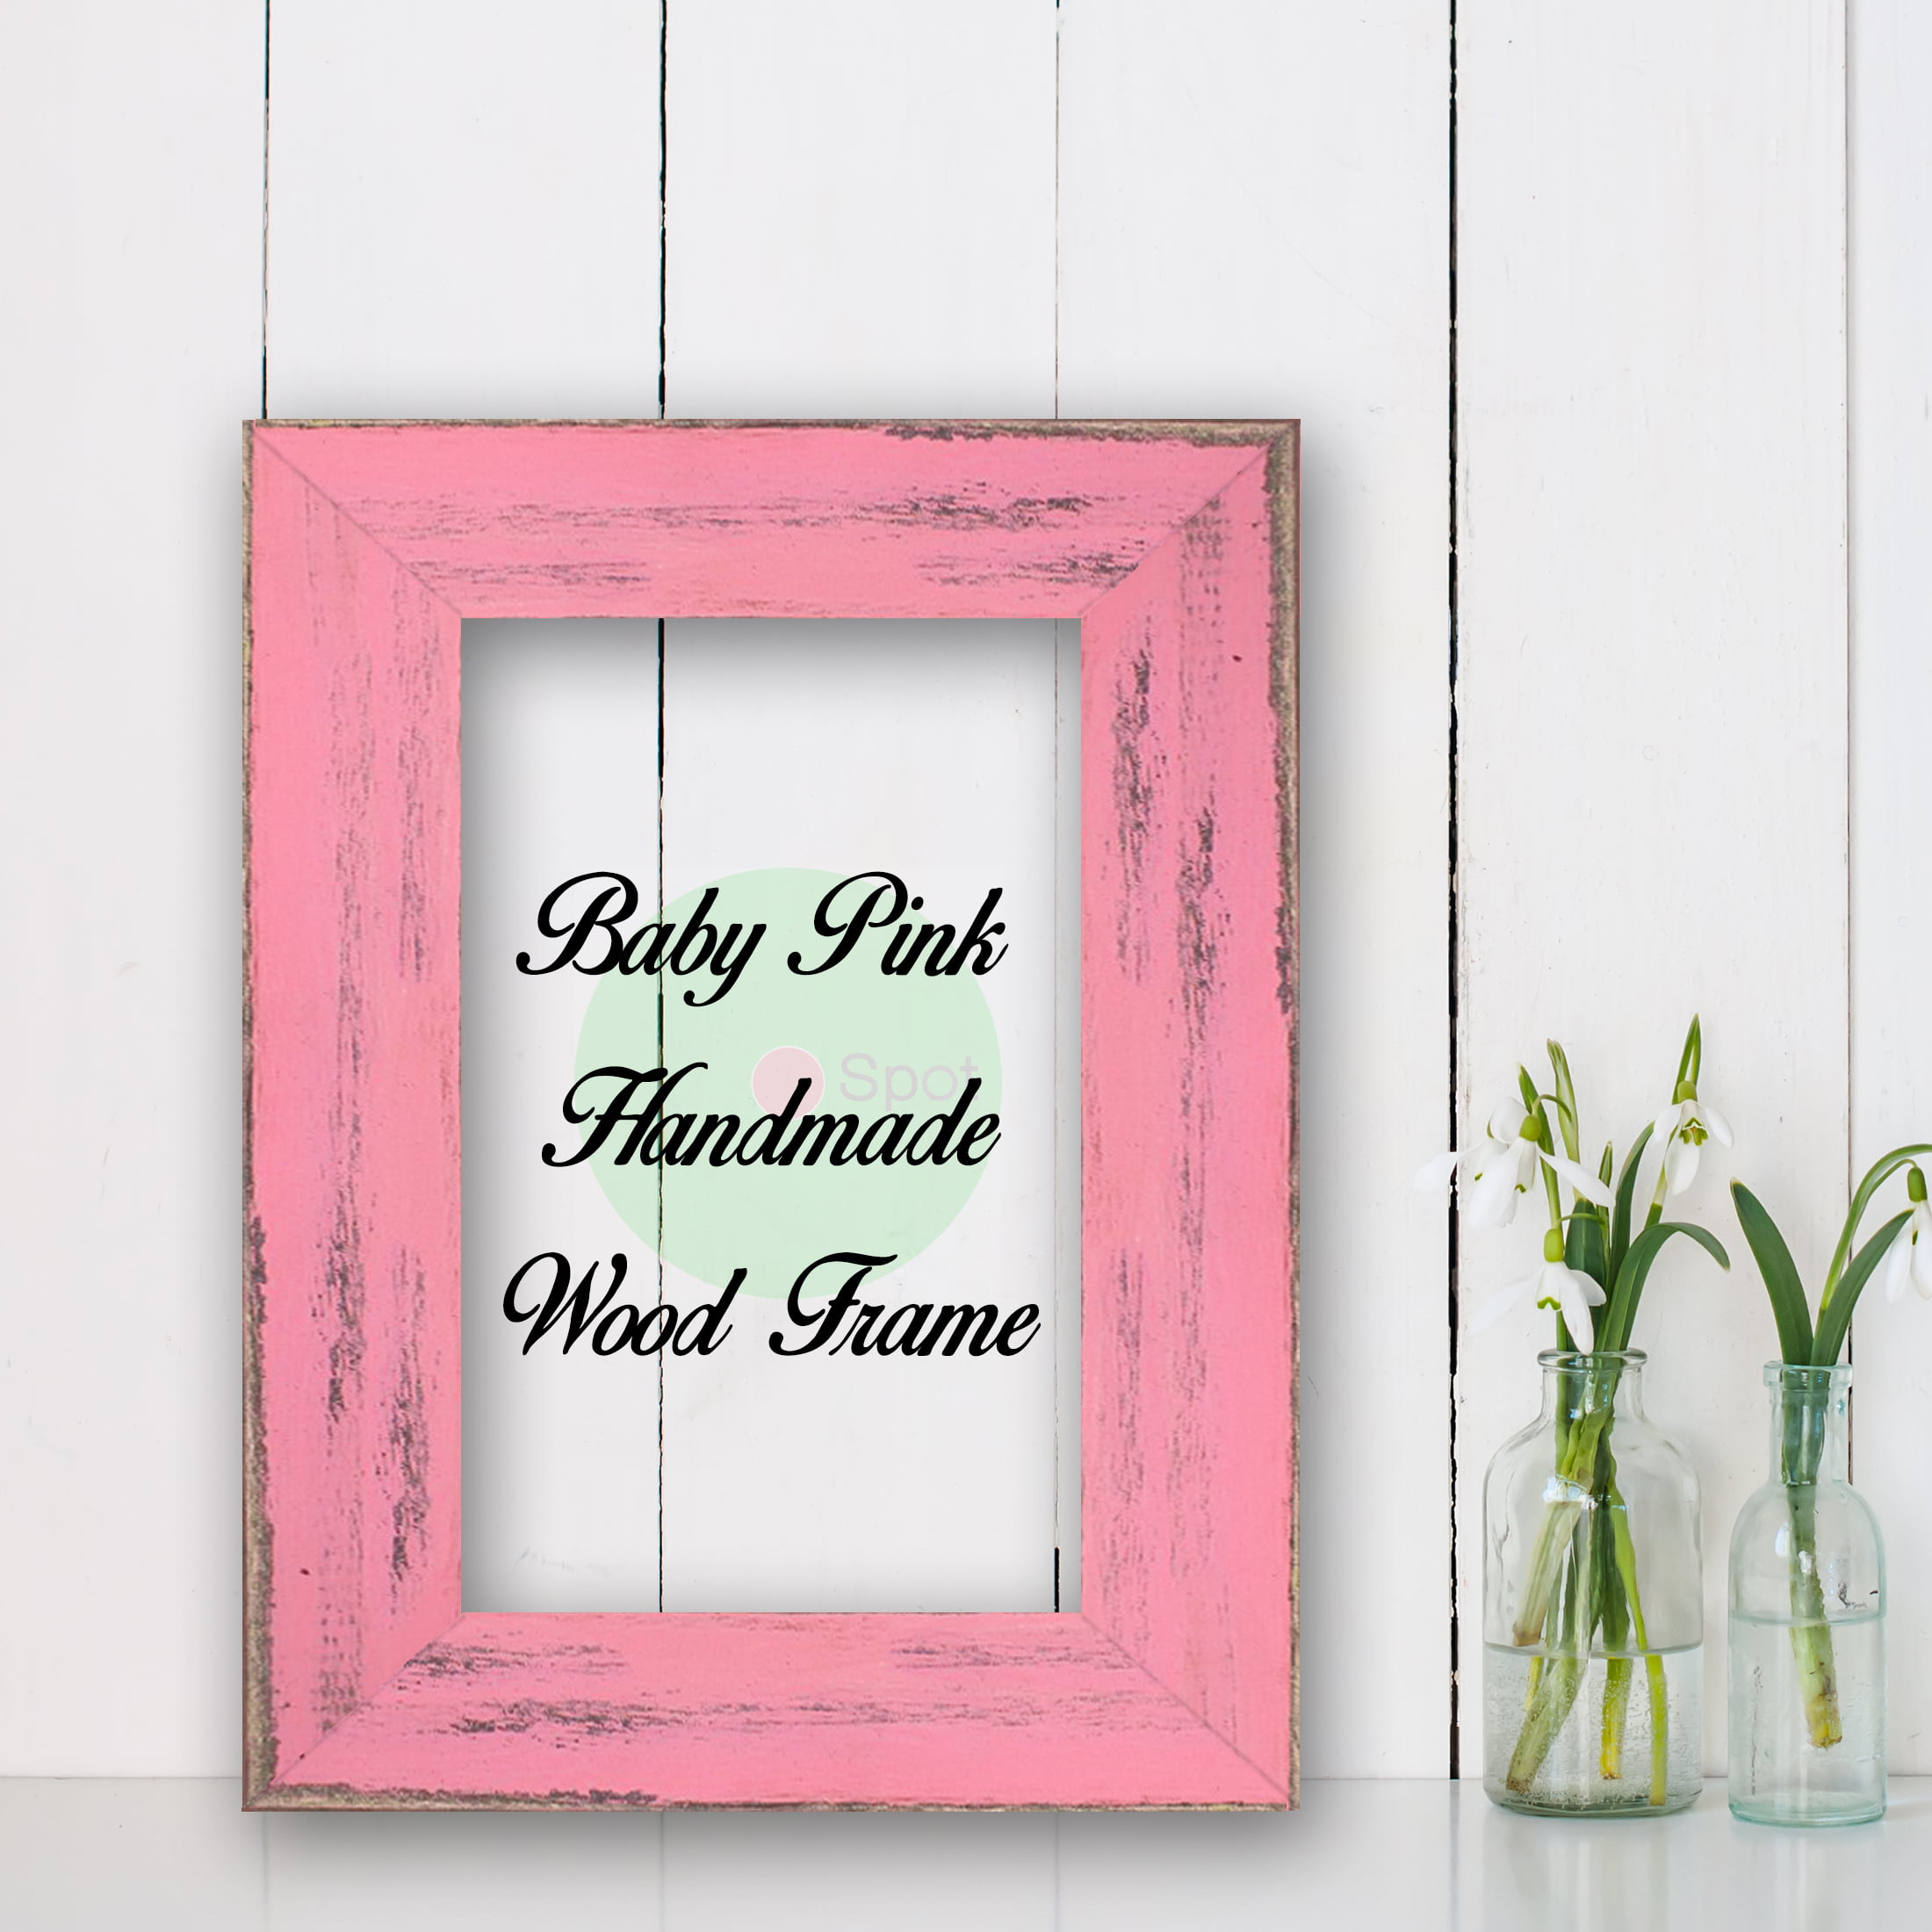 Wood Frame Photo Perfect for Picture Wedding Artwork Handmade Frame Art Cottage Beach Decor Baby Pink Wood Frame Poster